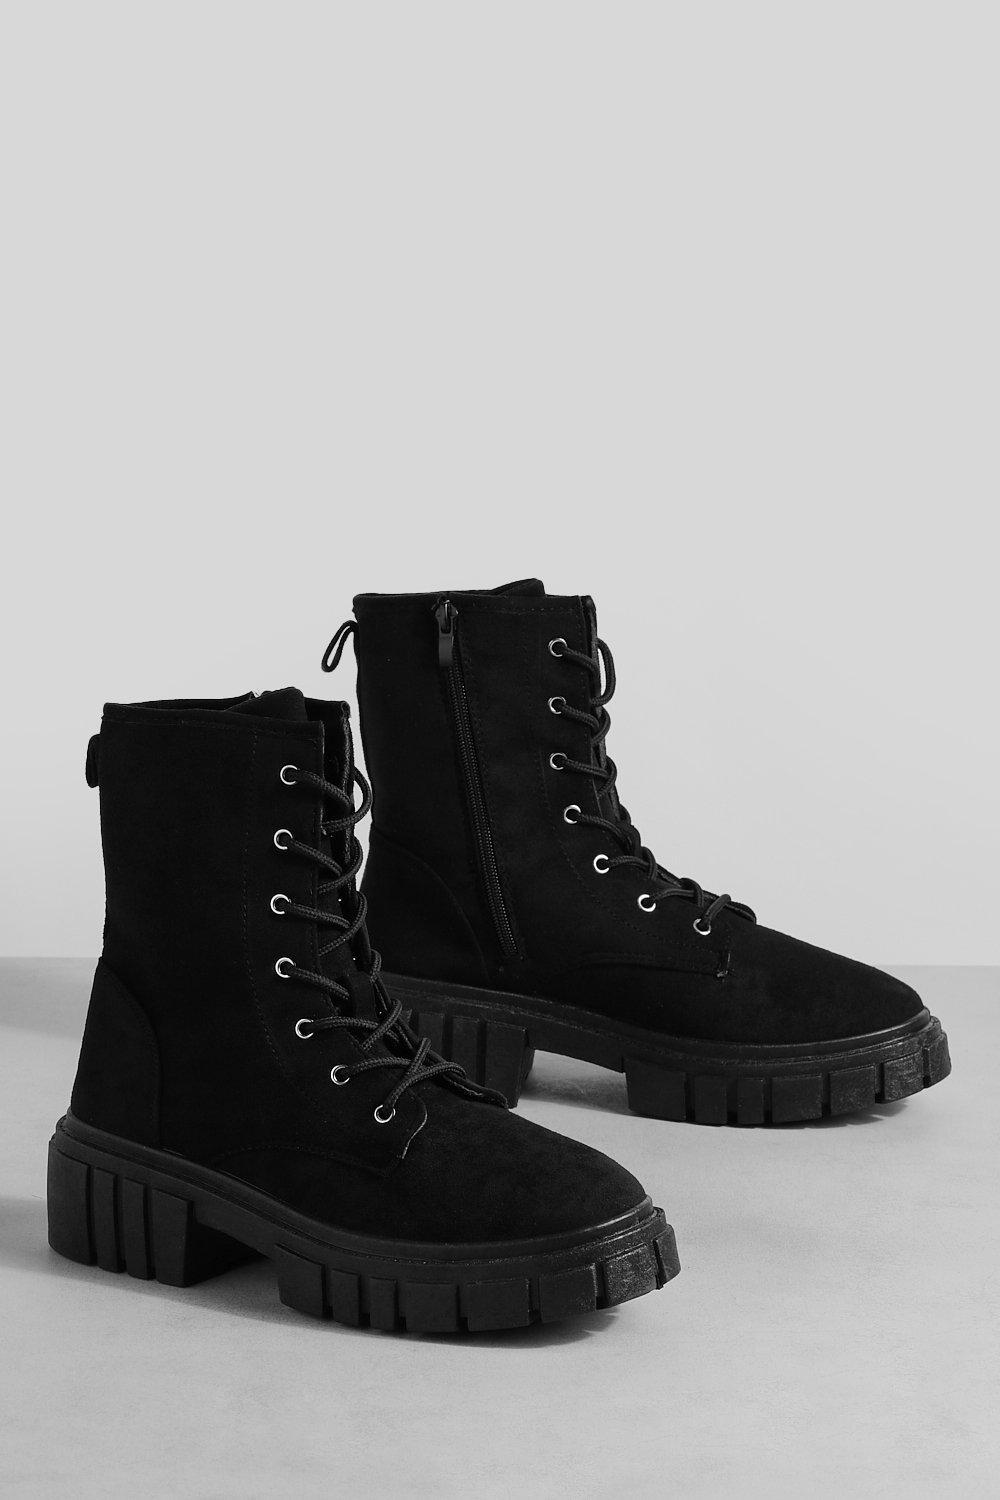 Boohoo Wide Fit Cleated Sole Lace Up Hiker Boots in Black | Lyst